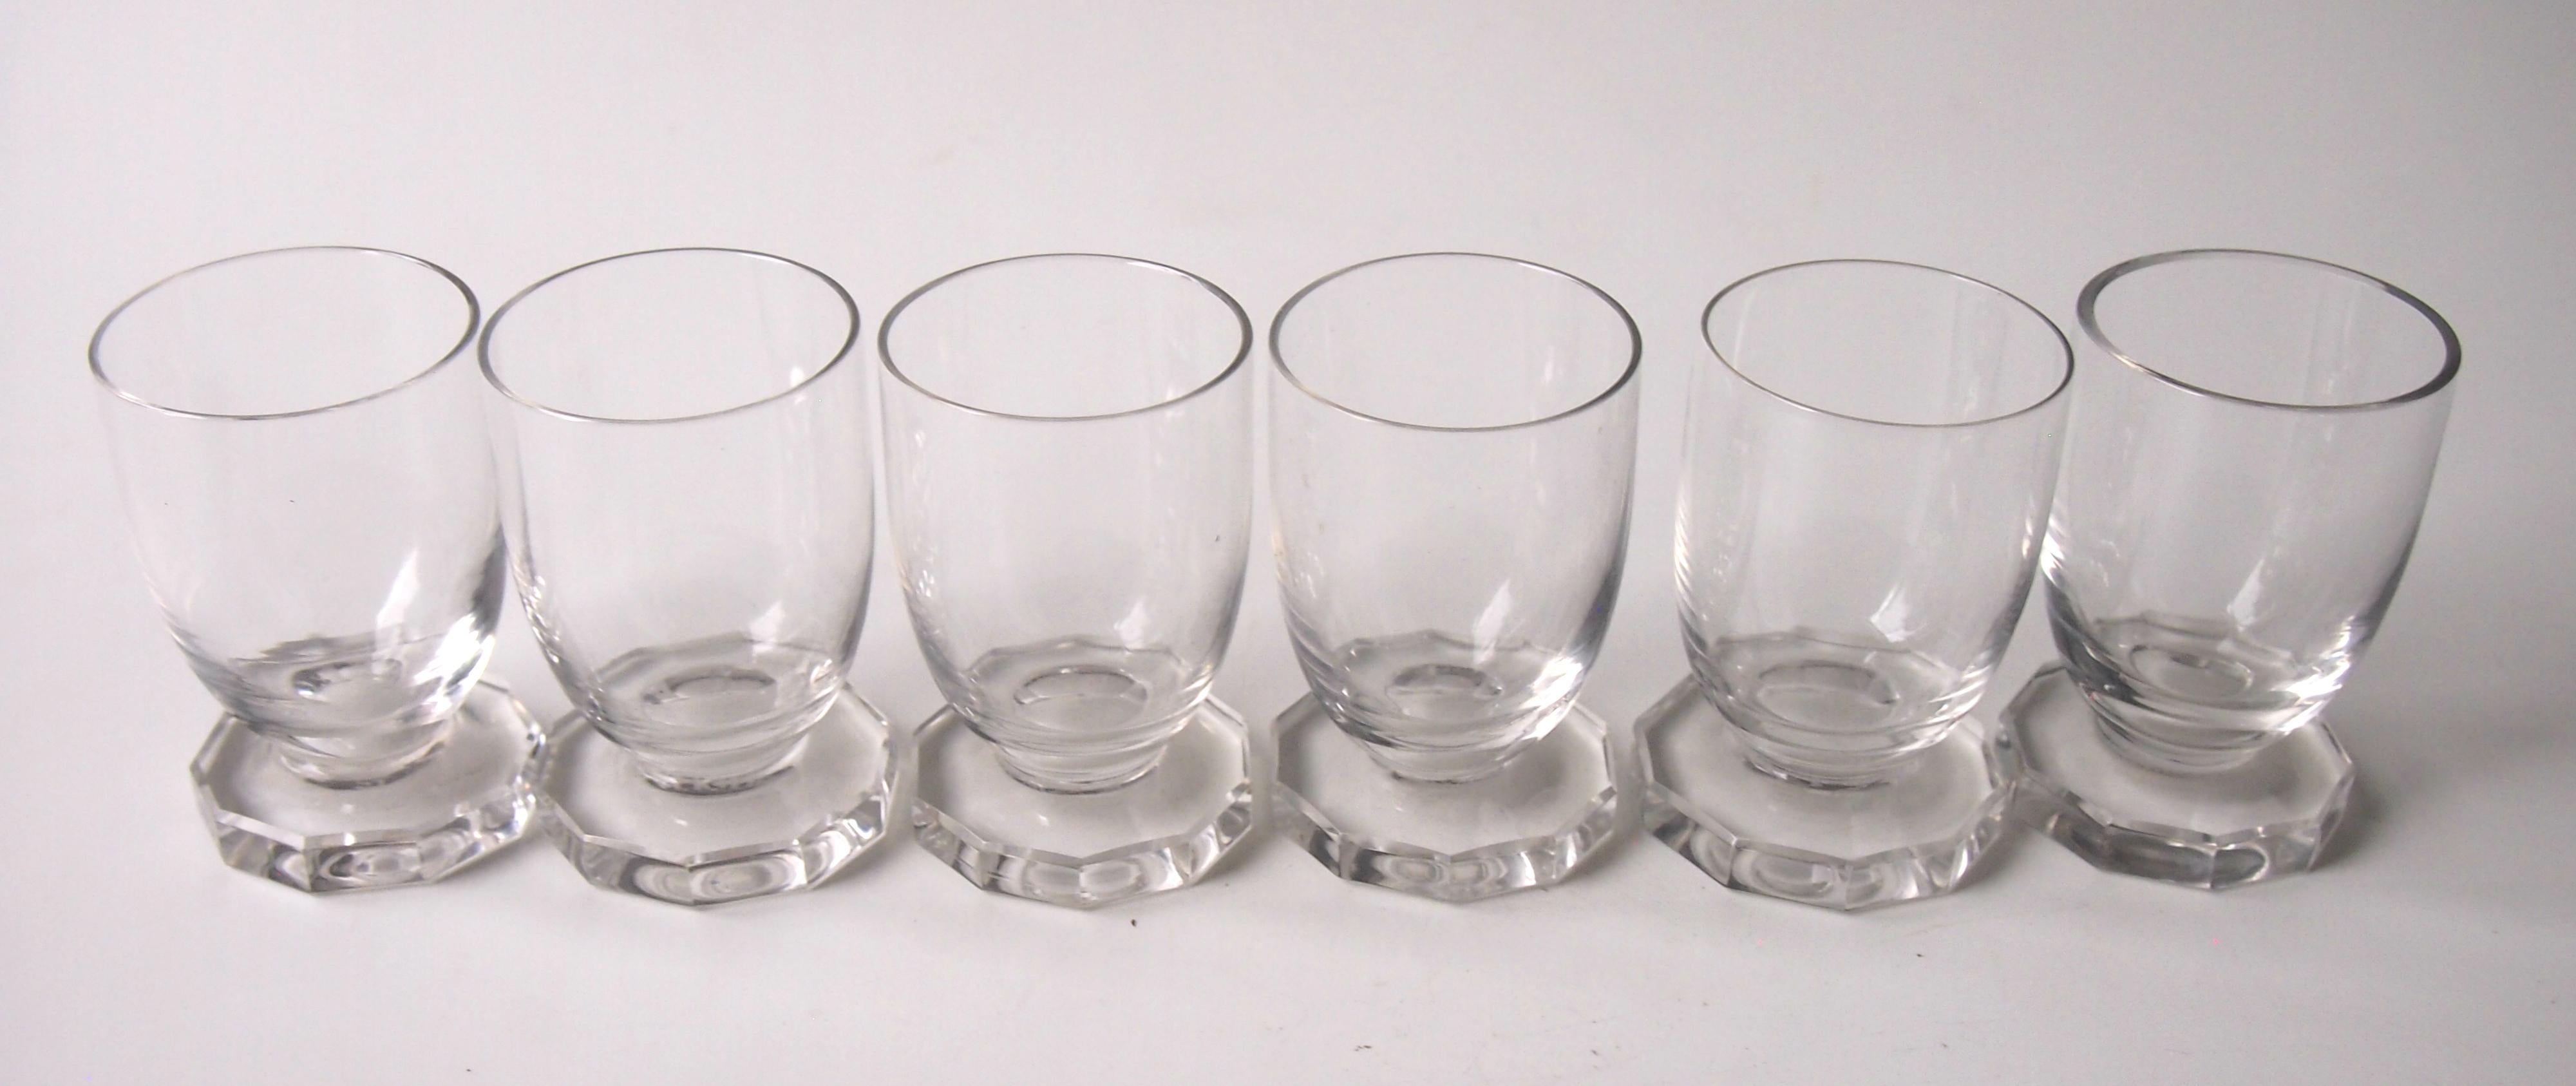 A set of six tiny René Lalique highly Art Deco Lille pattern liqueur glasses. All signed 'R Lalique France' (see last Picture) c 1938. Ref: Marcilhac p856 n:5406

The Lille pattern was made briefly after the war, but these are rare pre-war